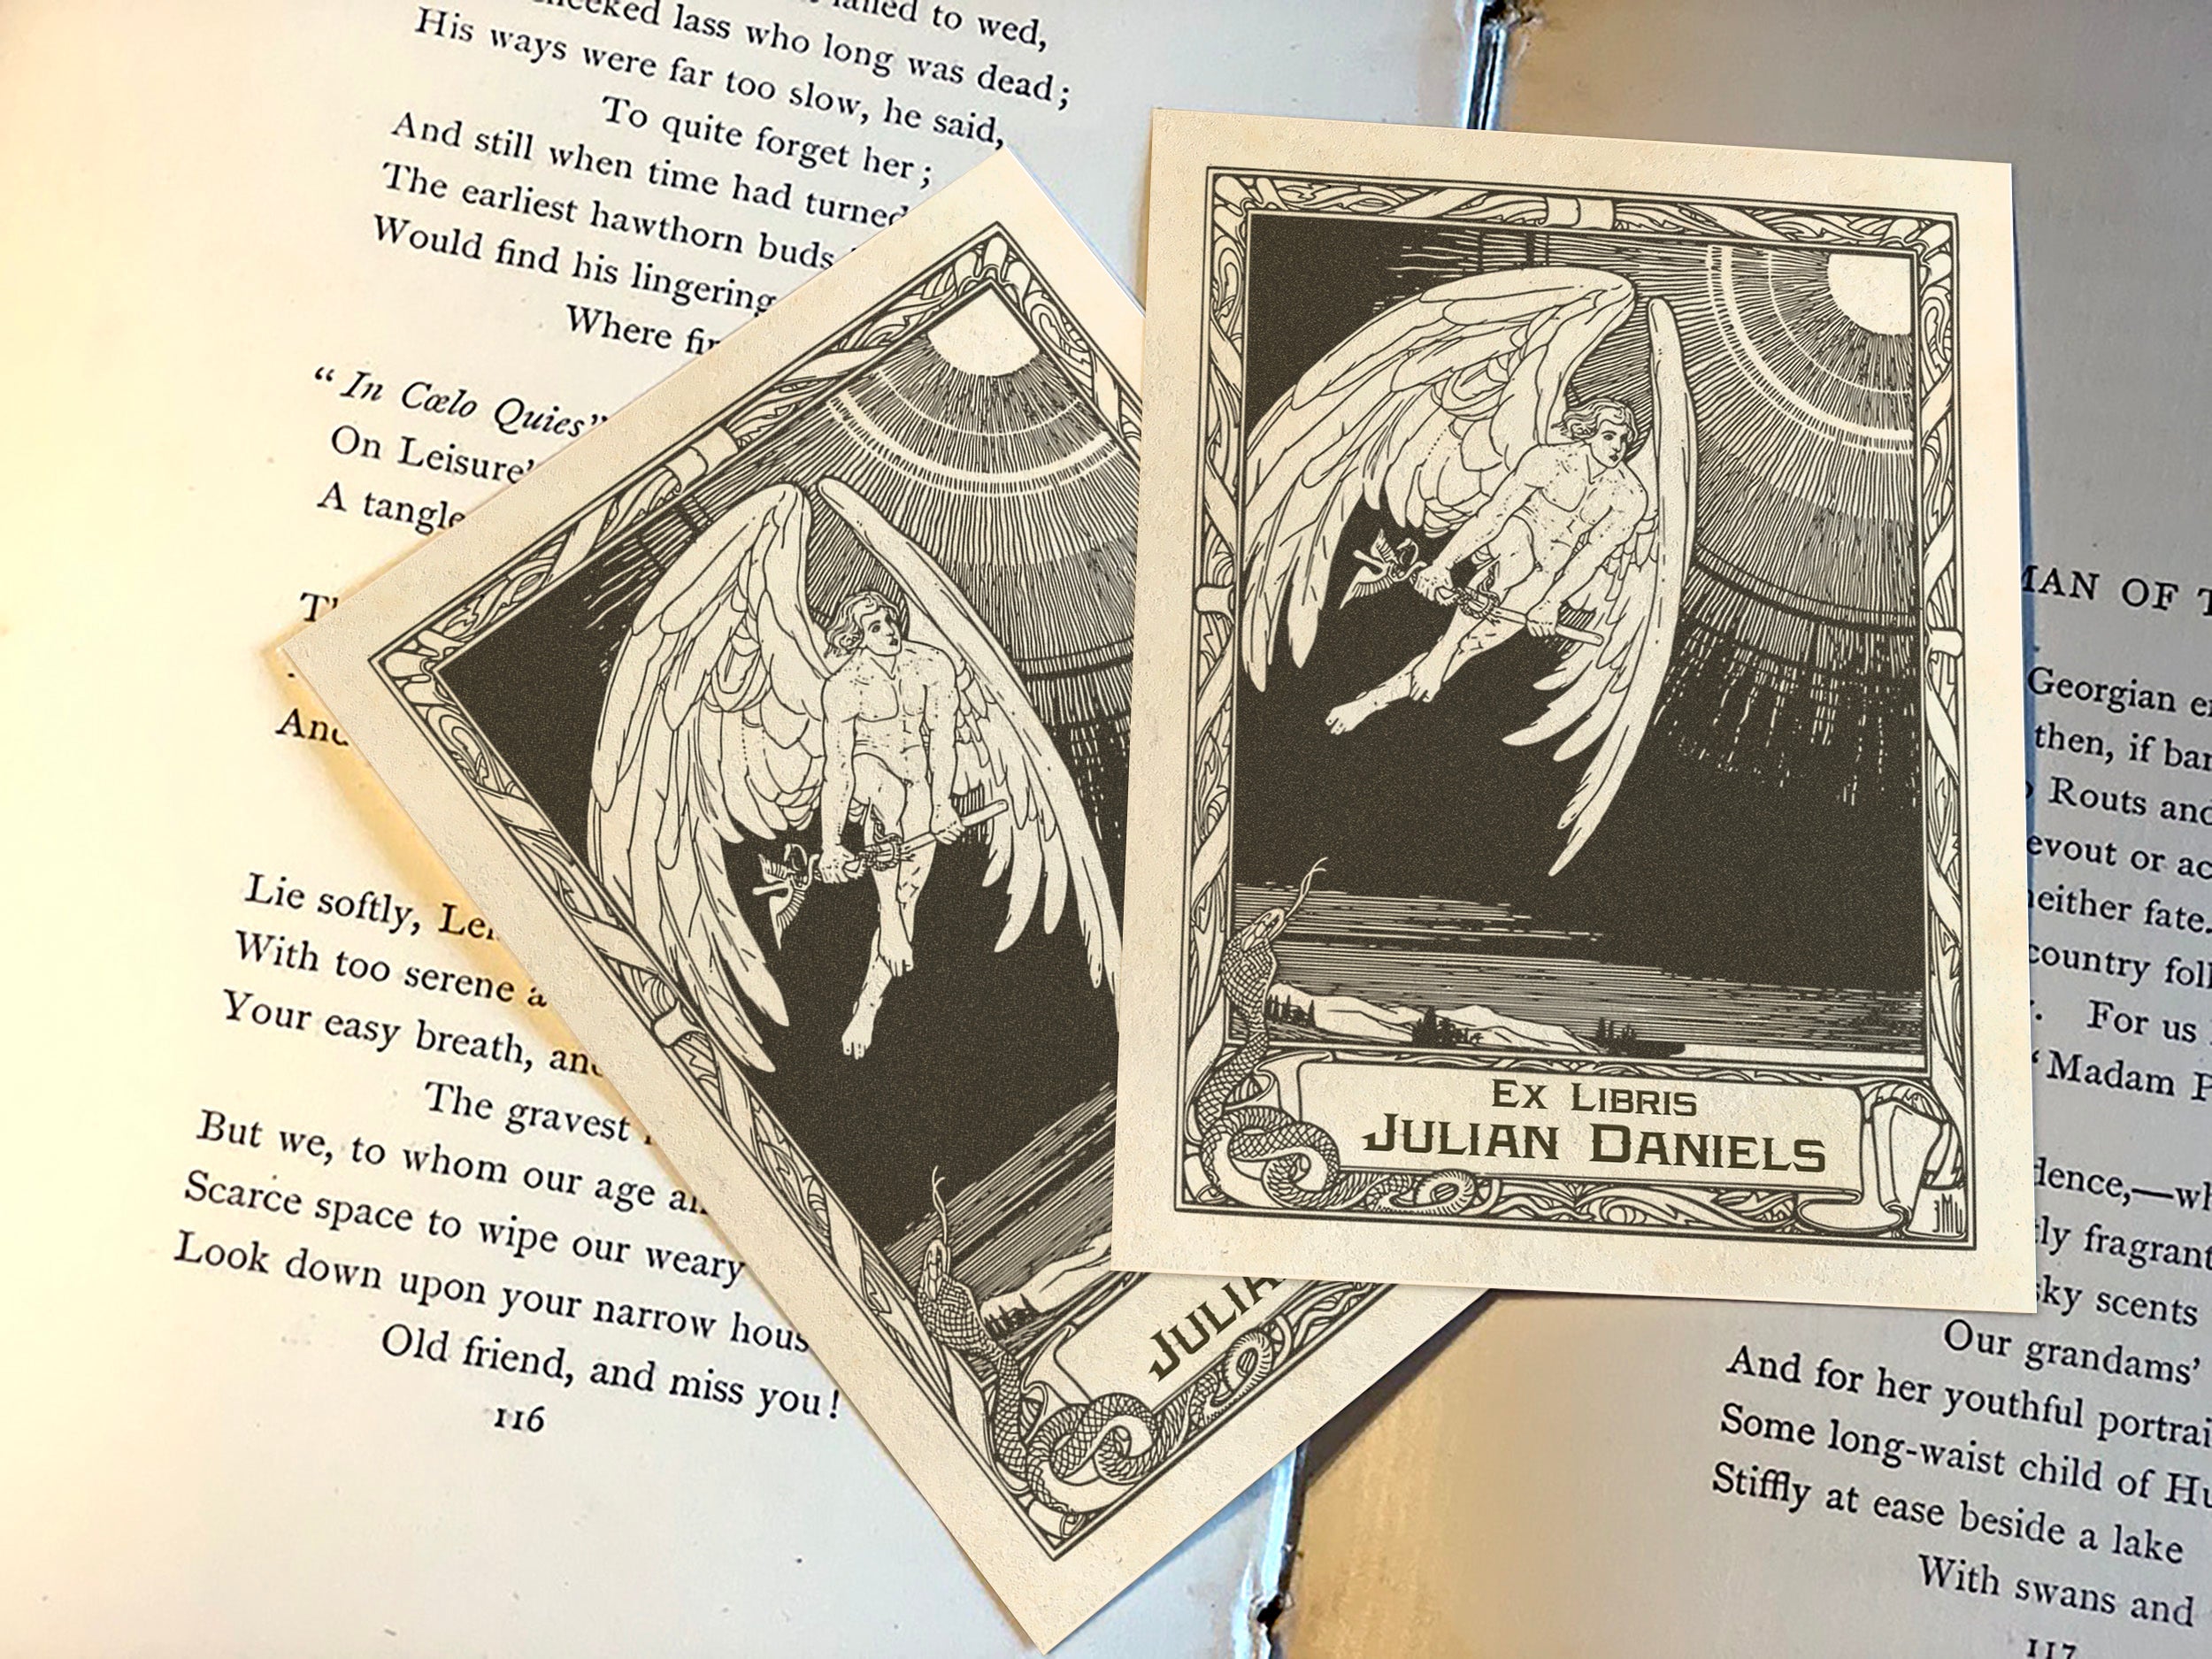 Hermes, Personalized Gothic Ex-Libris Bookplates, Crafted on Traditional Gummed Paper, 3in x 4in, Set of 30